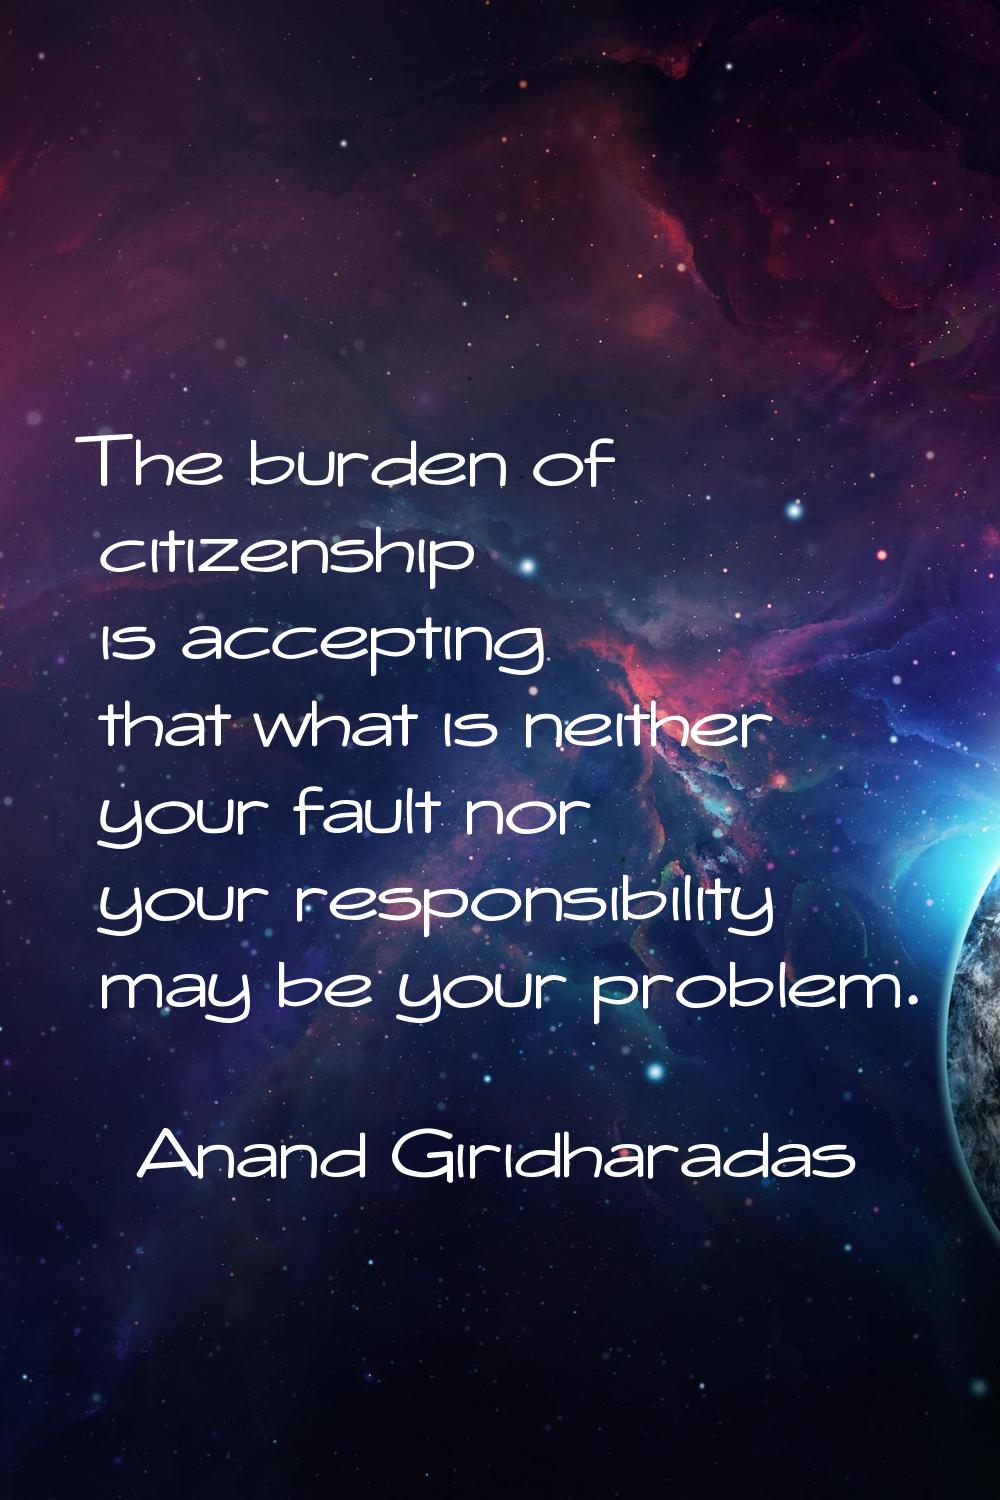 The burden of citizenship is accepting that what is neither your fault nor your responsibility may 